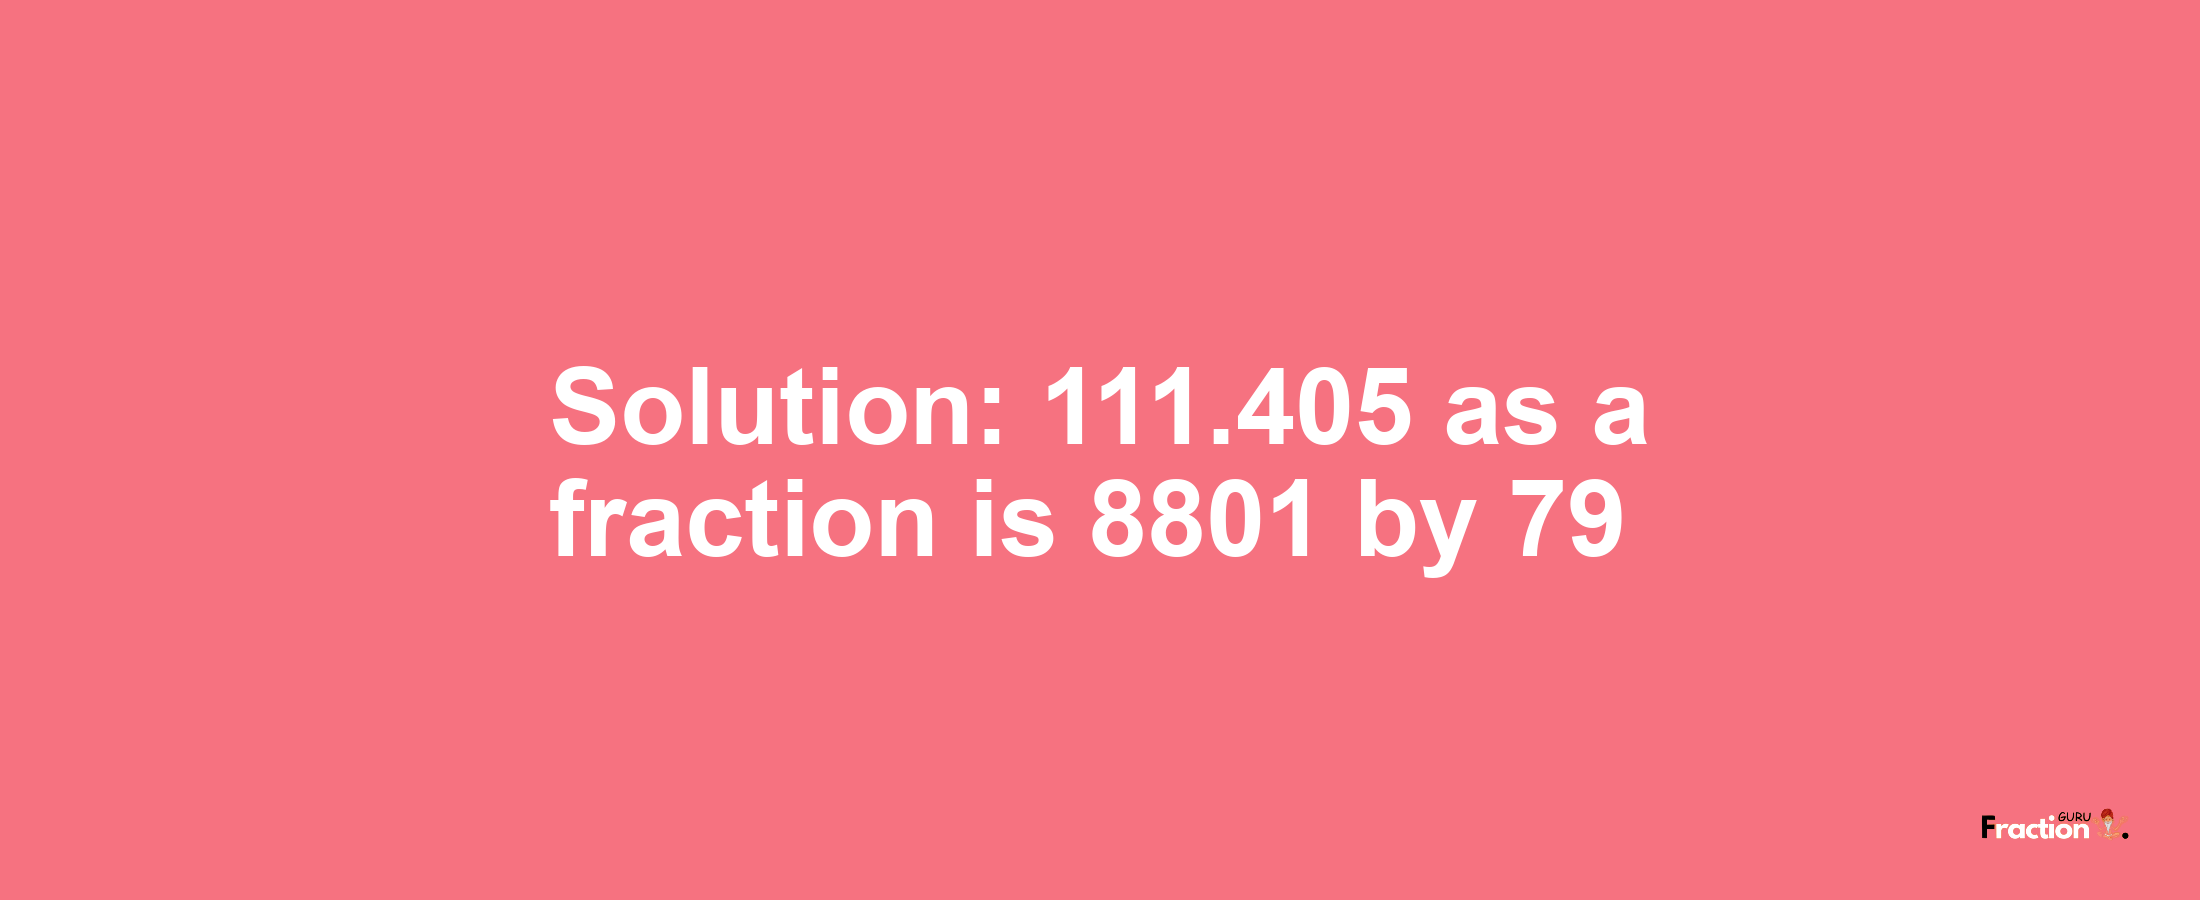 Solution:111.405 as a fraction is 8801/79